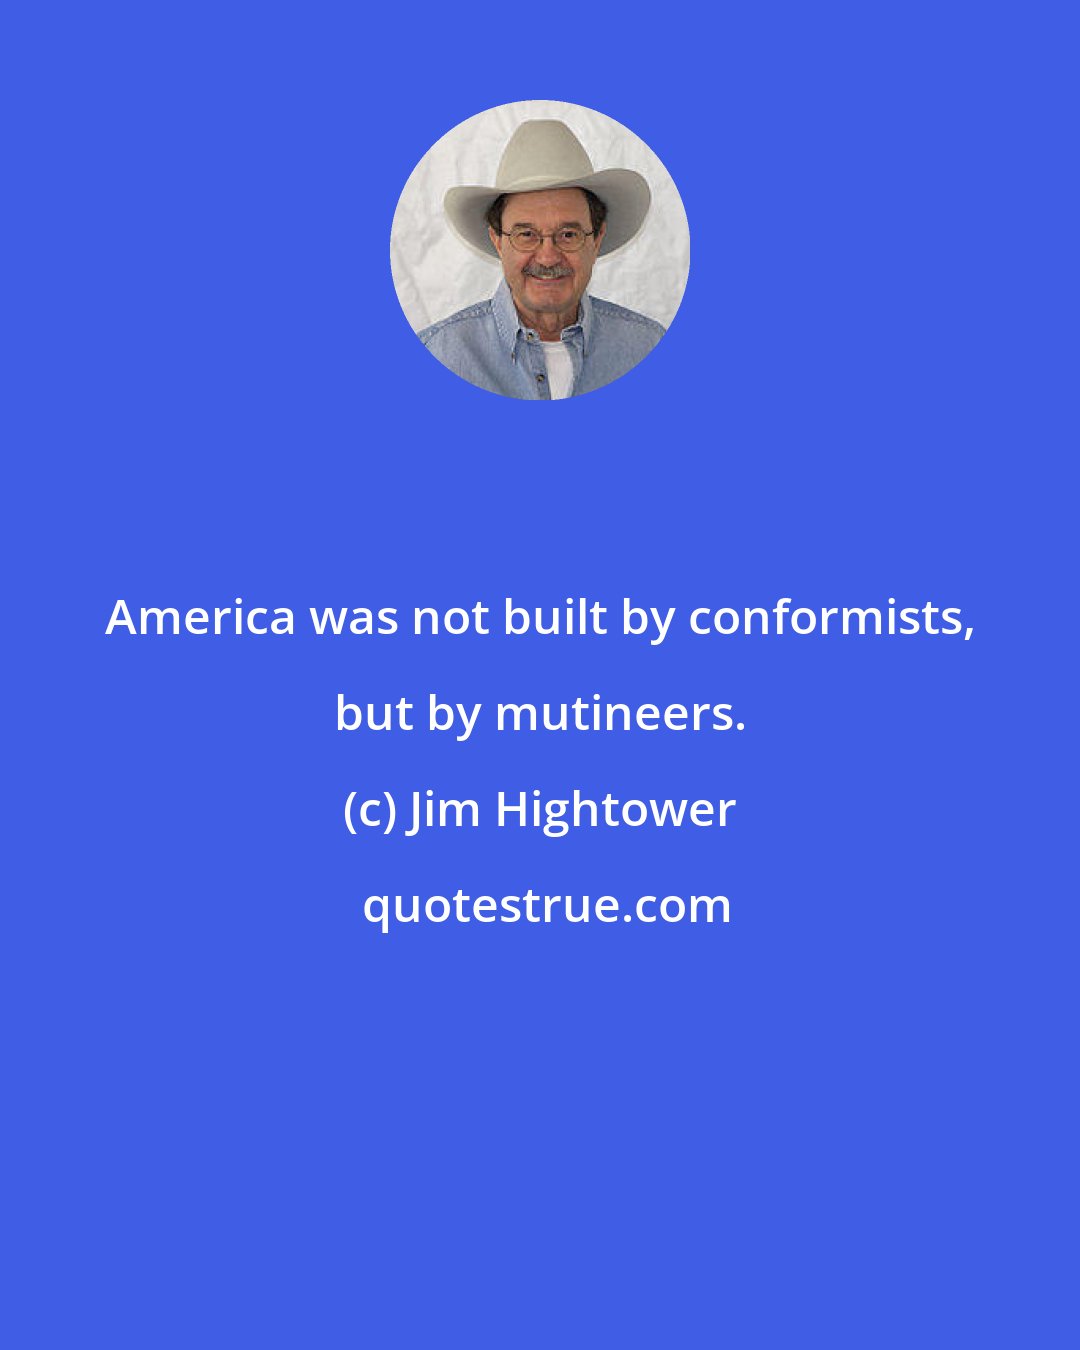 Jim Hightower: America was not built by conformists, but by mutineers.